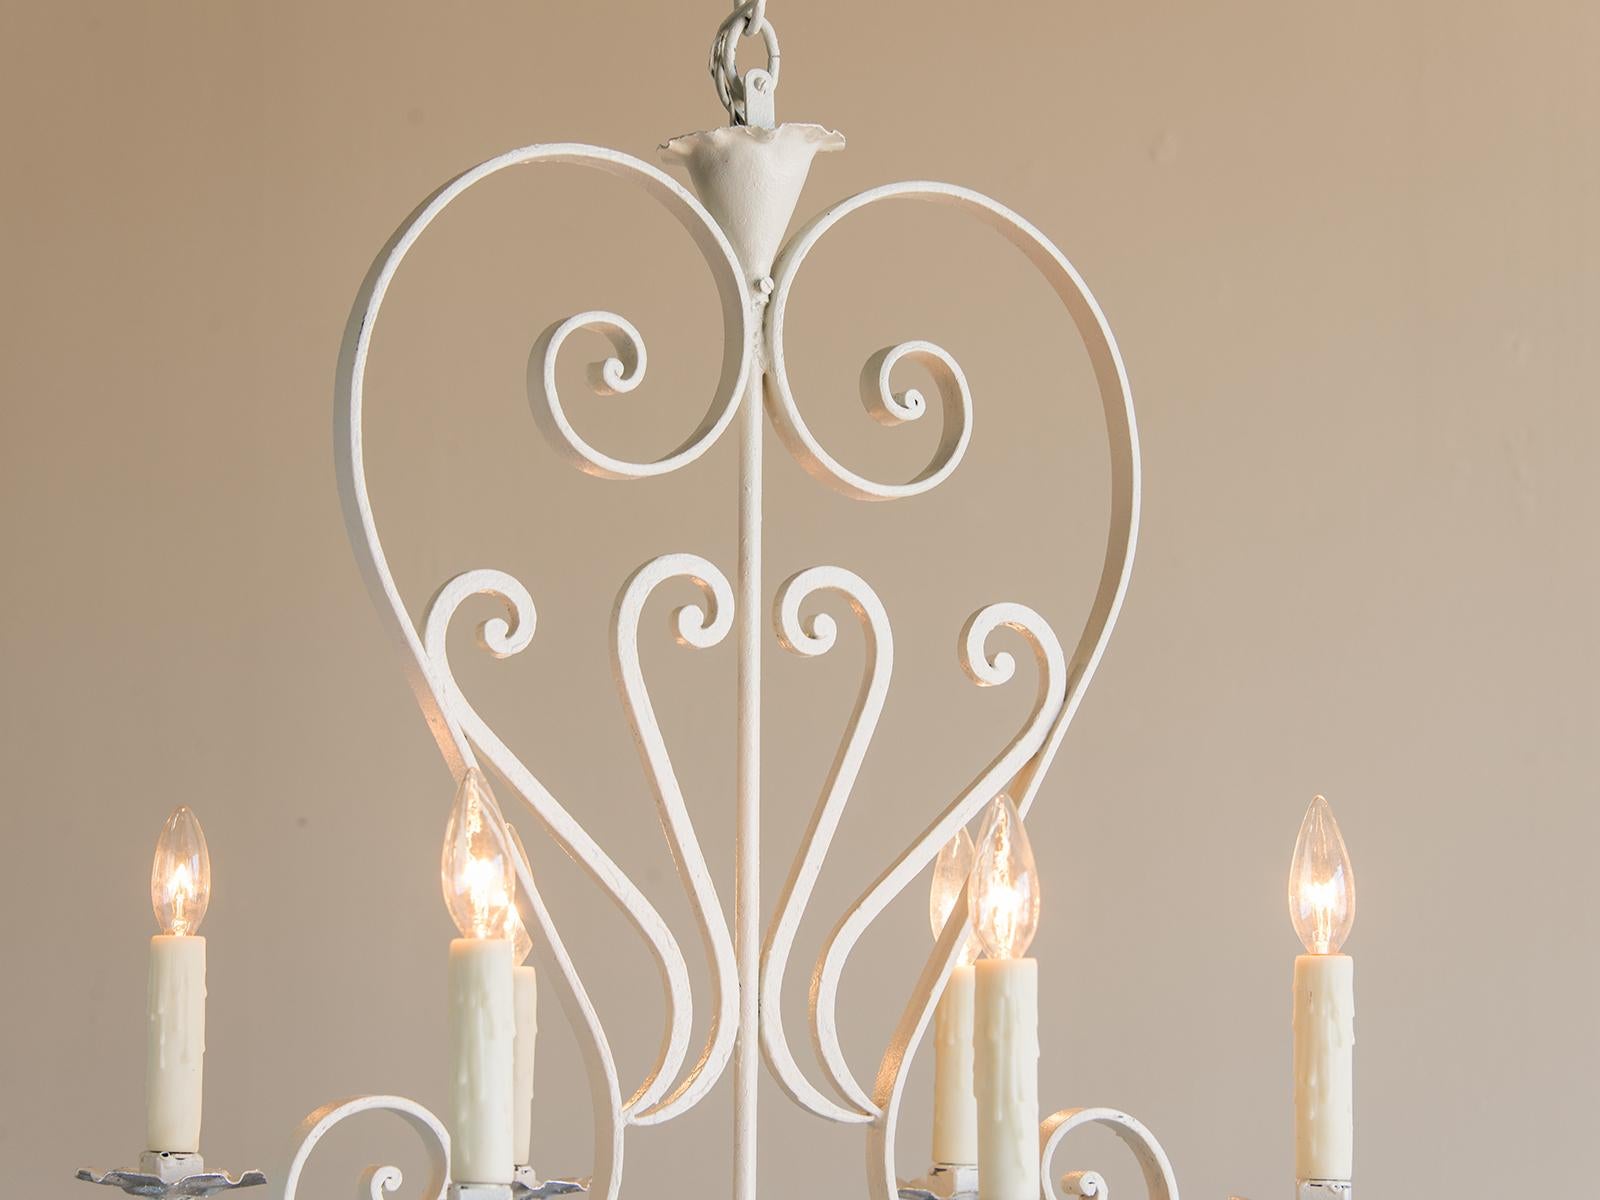 The unusually tall and slender profile of this vintage French chandelier from France circa 1950 is visually striking as it updates a nineteenth century design in a clever manner. The wooden horizontal support was coated with silver leaf while the